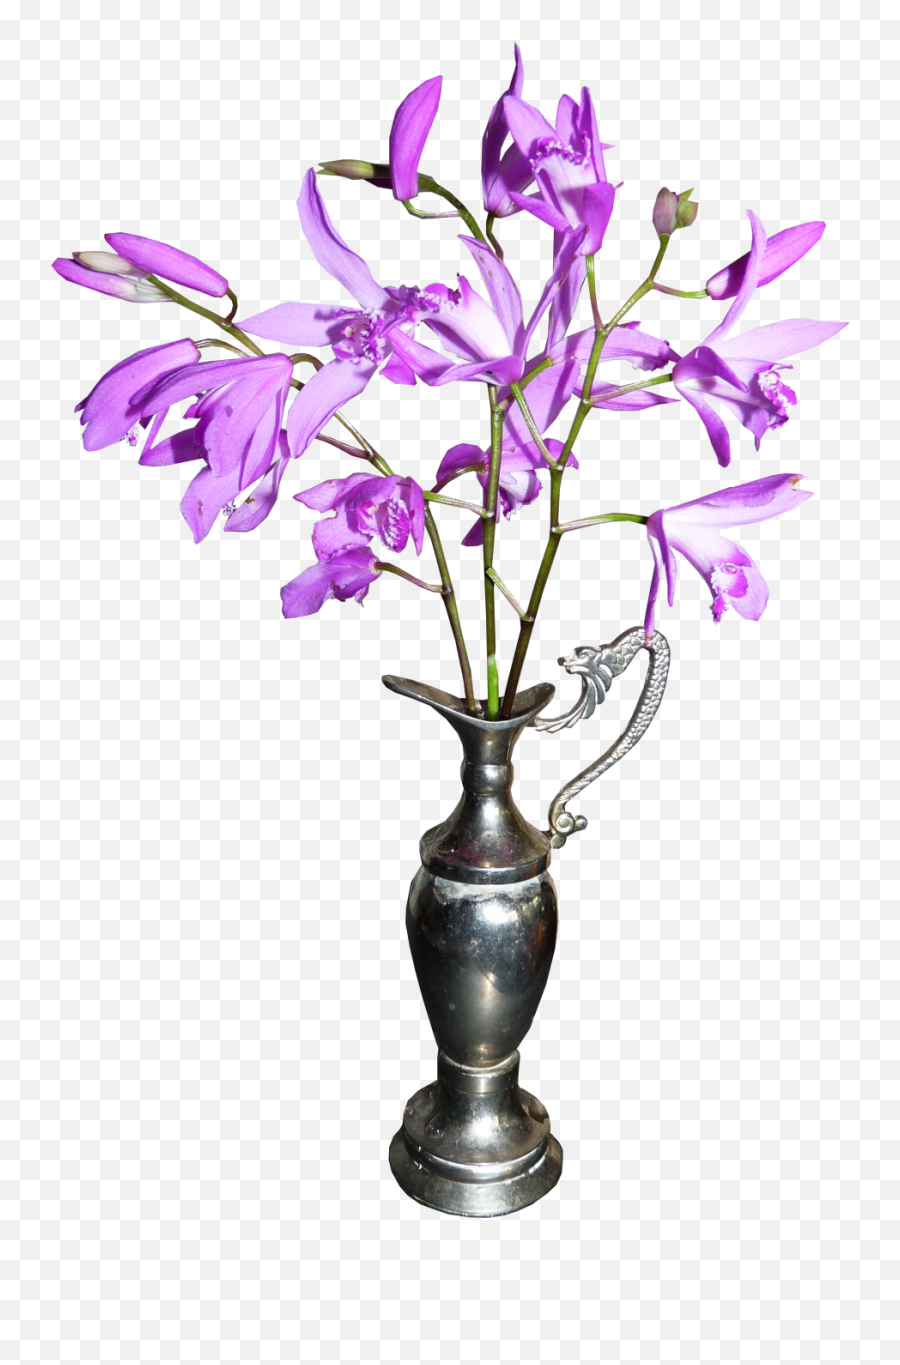 Orchid Png Image - Tulip Vase,Orchid Png